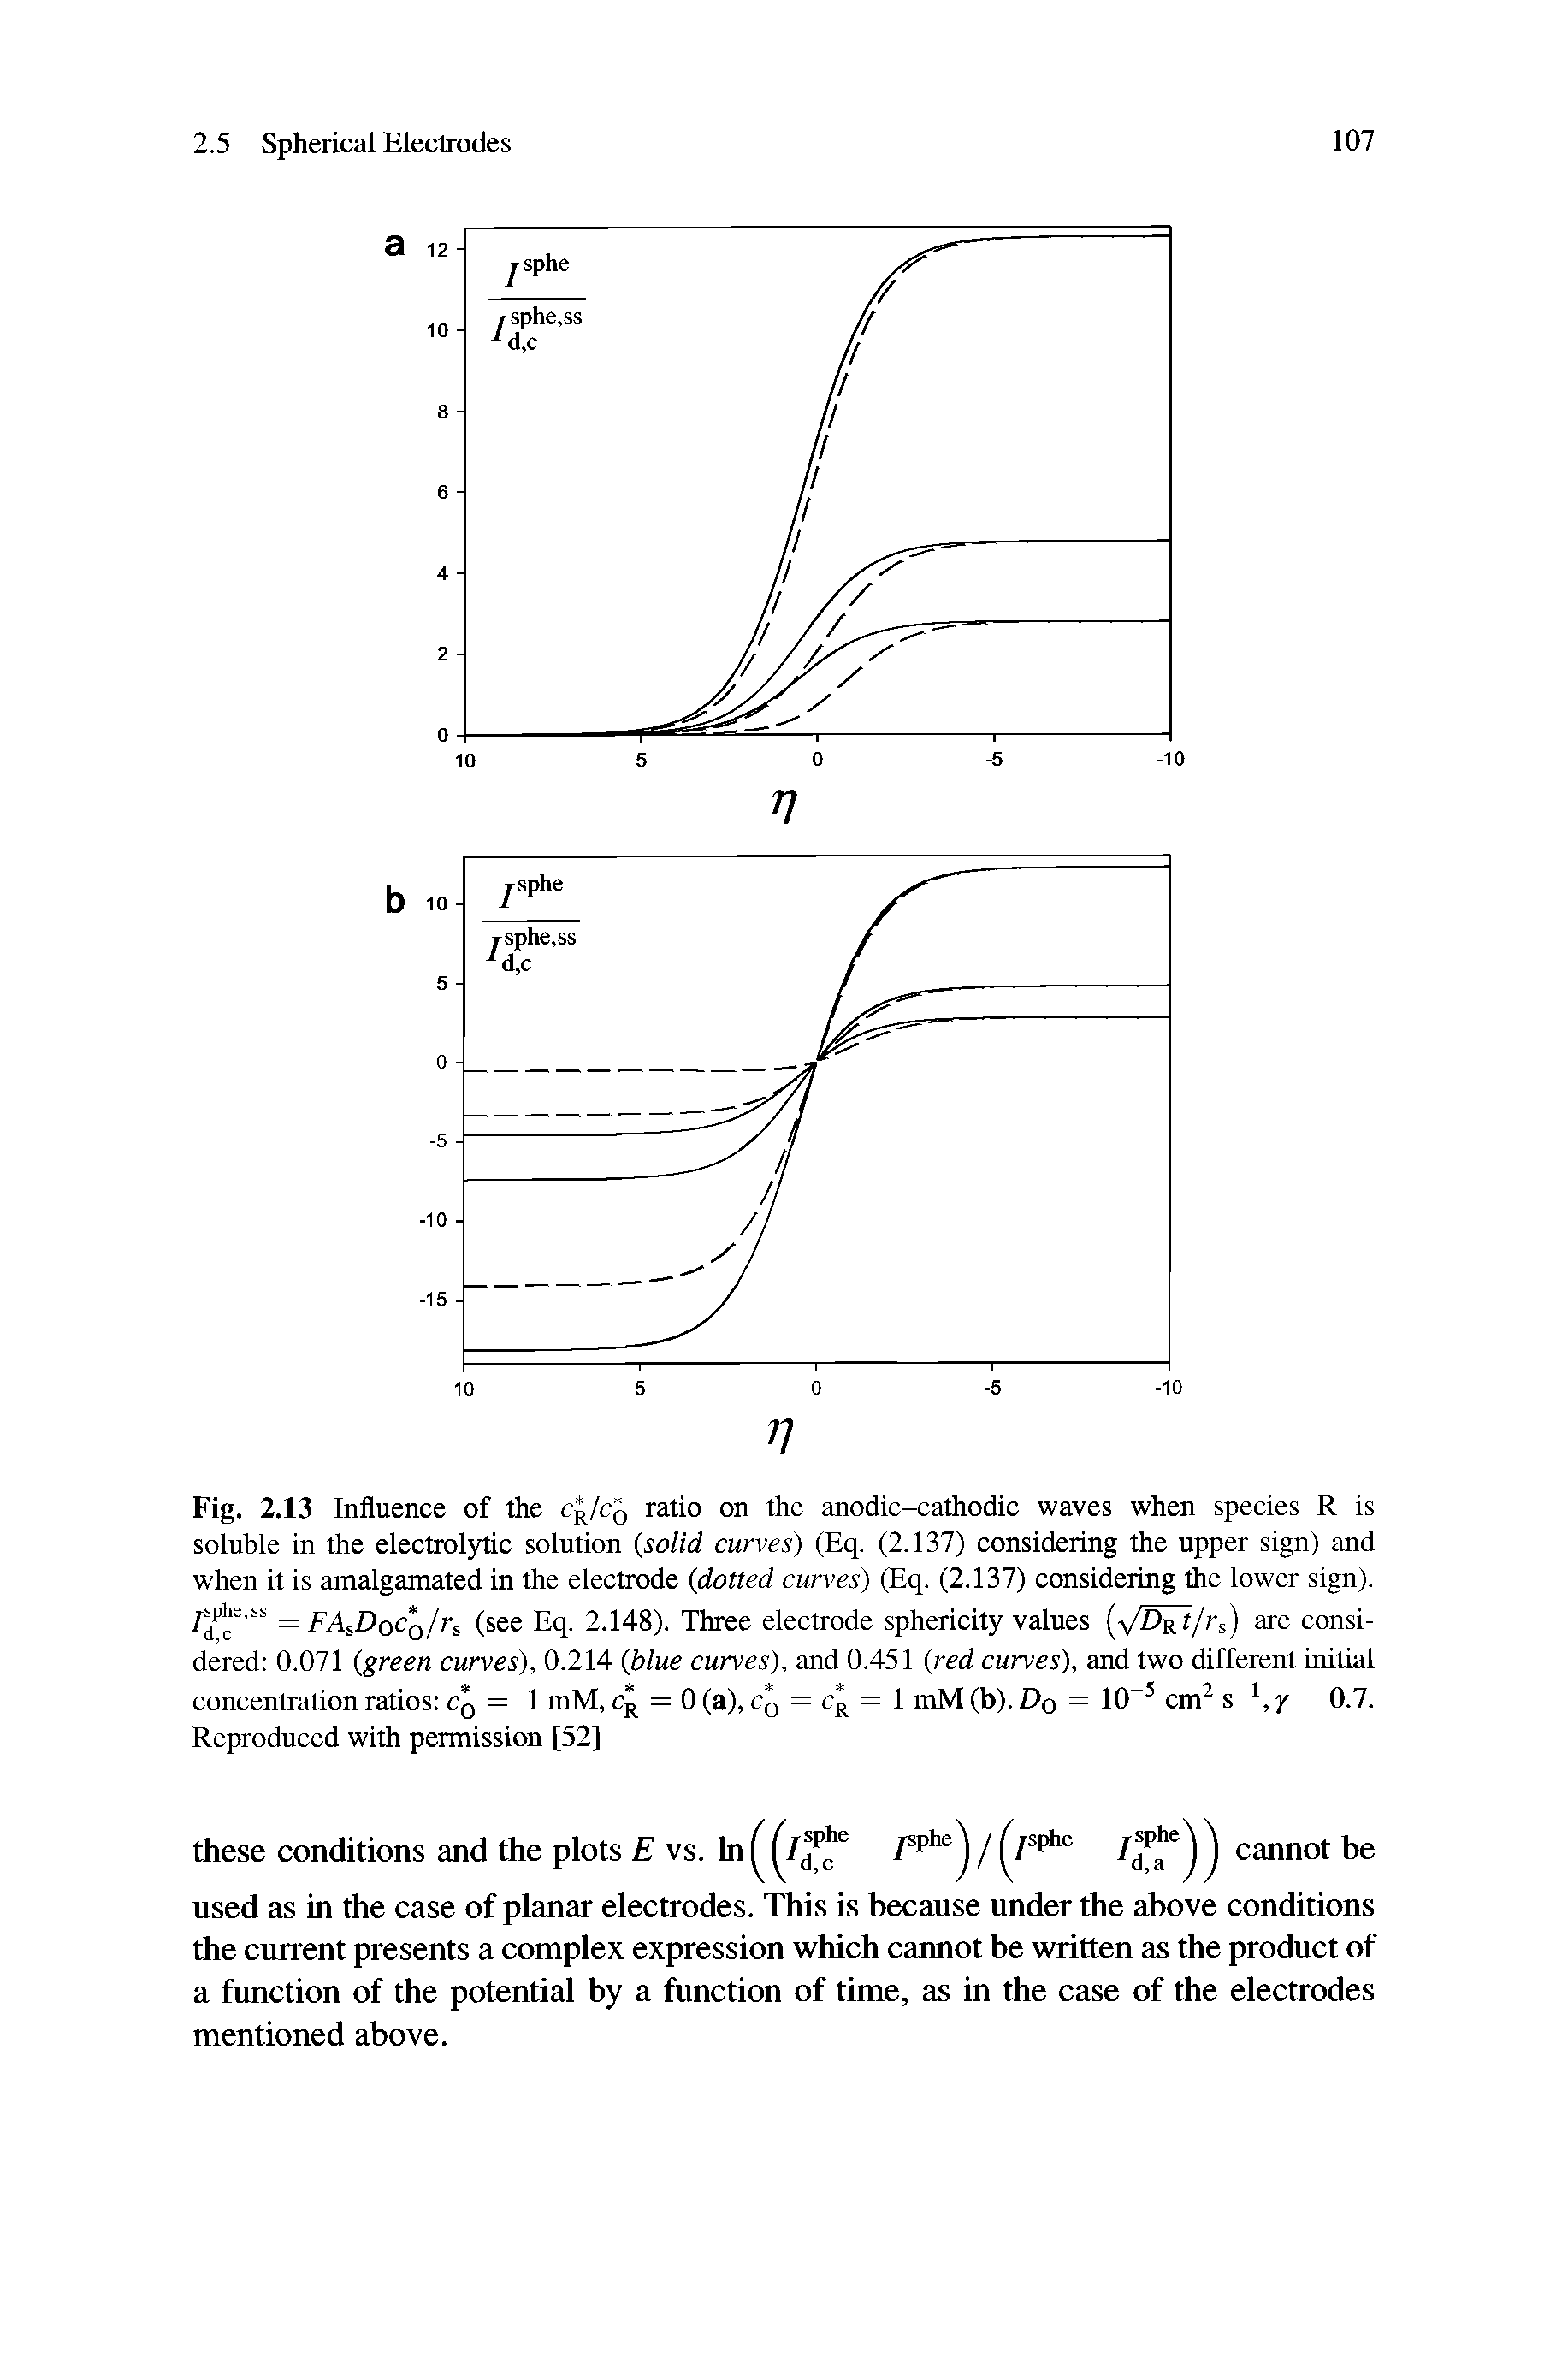 Fig. 2.13 Influence of the c /cq ratio on the anodic-cathodic waves when species R is soluble in the electrolytic solution (solid curves) (Eq. (2.137) considering the upper sign) and when it is amalgamated in the electrode (dotted curves) (Eq. (2.137) considering the lower sign), jsphe.ss pAsDoC 0/rs (see Eq. 2.148). Three electrode sphericity values ( JD-g t/rs) are considered 0.071 (green curves), 0.214 (blue curves), and 0.451 (red curves), and two different initial concentration ratios Cq = 1 mM, = 0 (a), co = cr = 1 mM (b). Do = 10-5 cm2 s 1, y = 0.7. Reproduced with permission [52]...